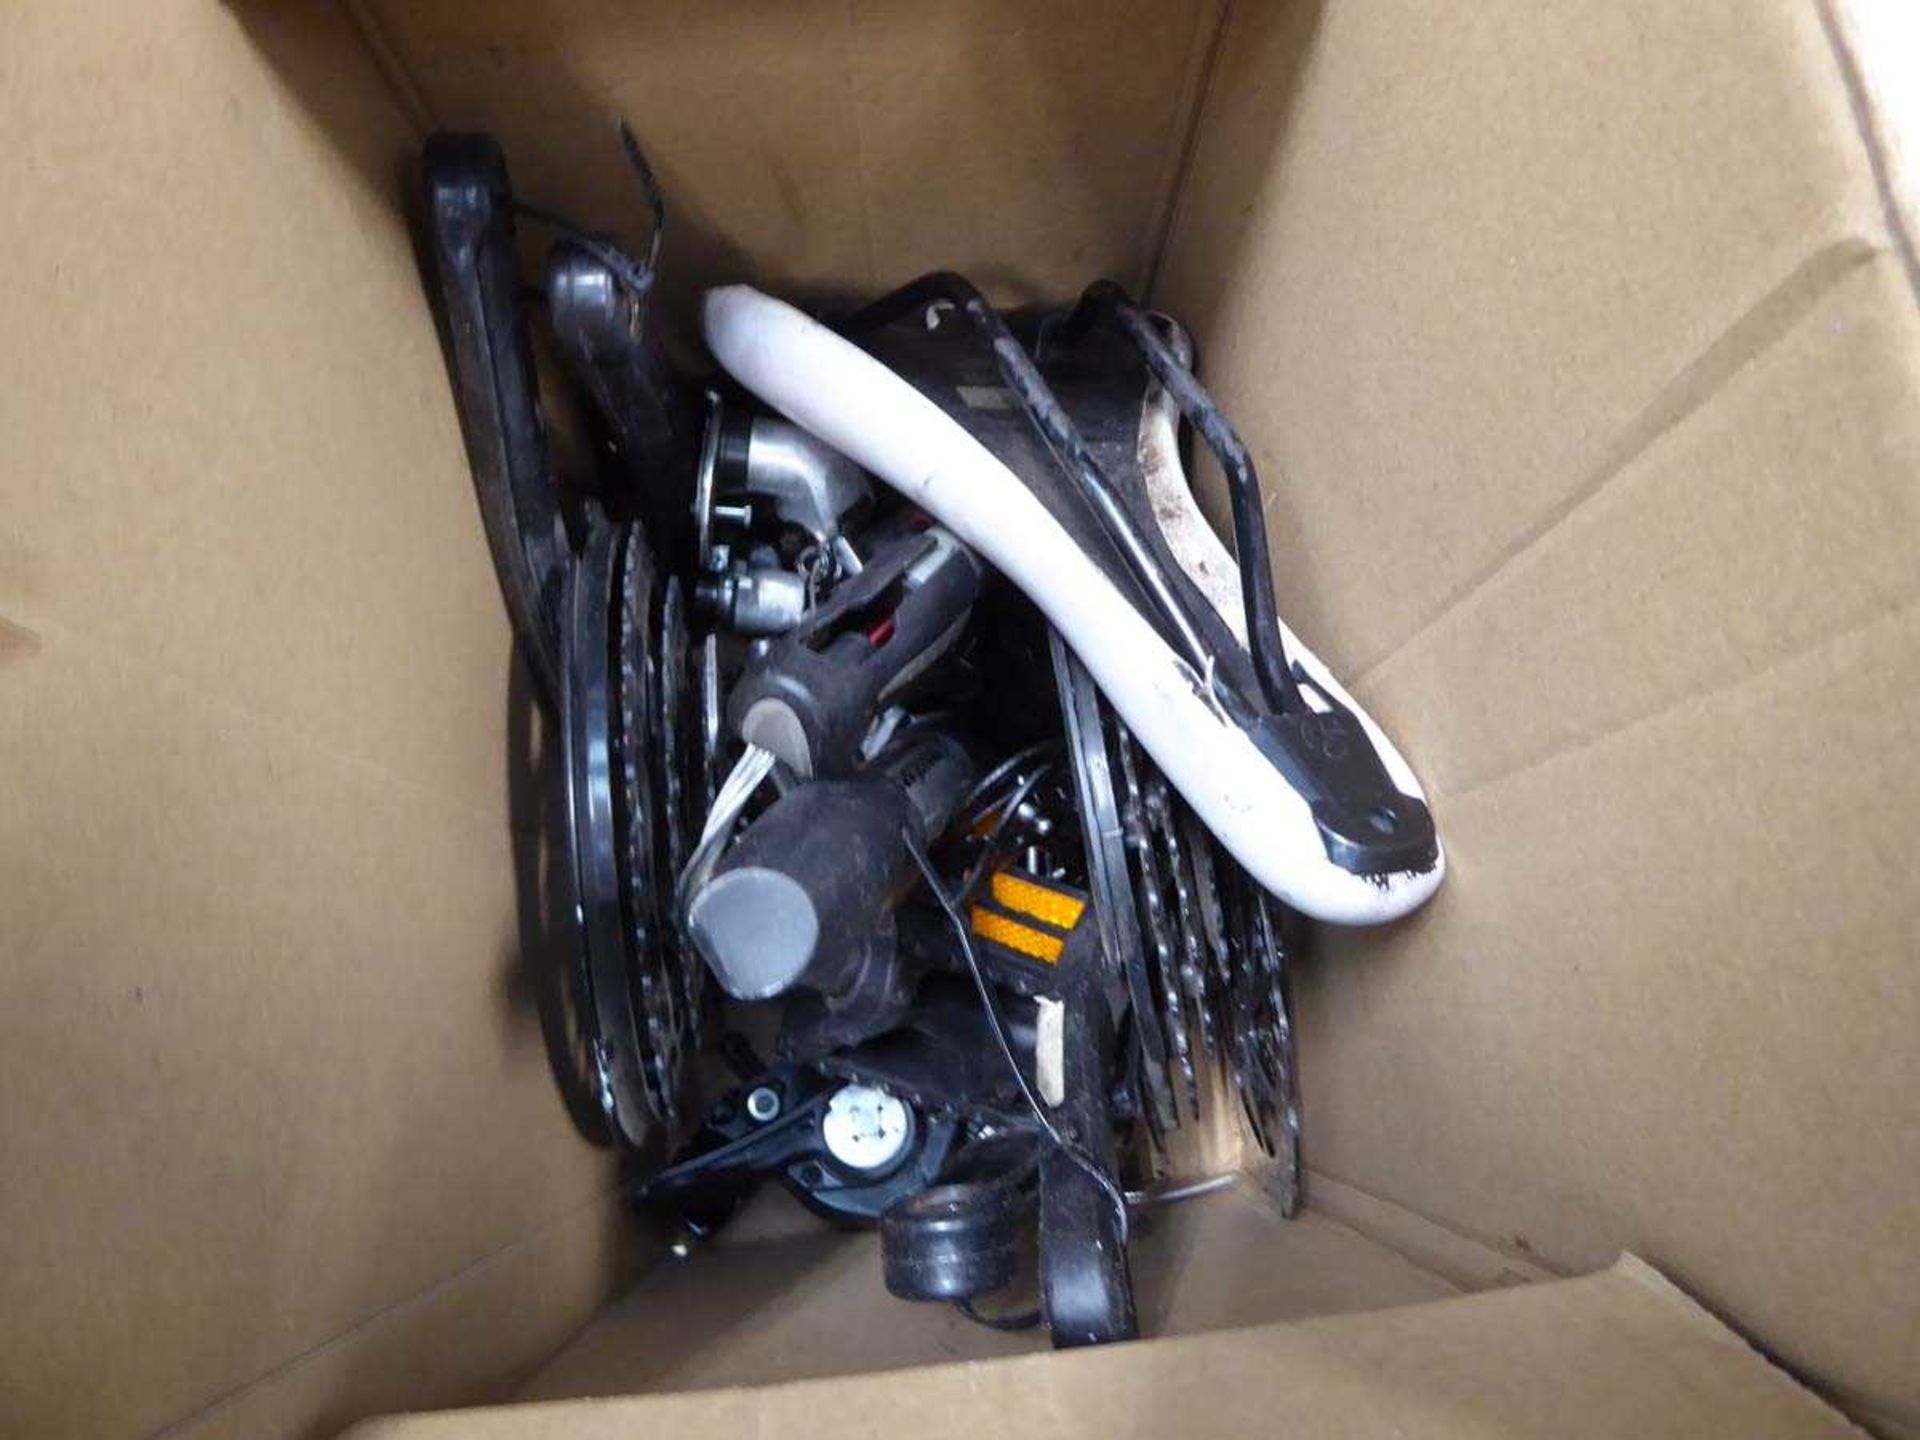 Box containing used bike seat, pedals and pumps